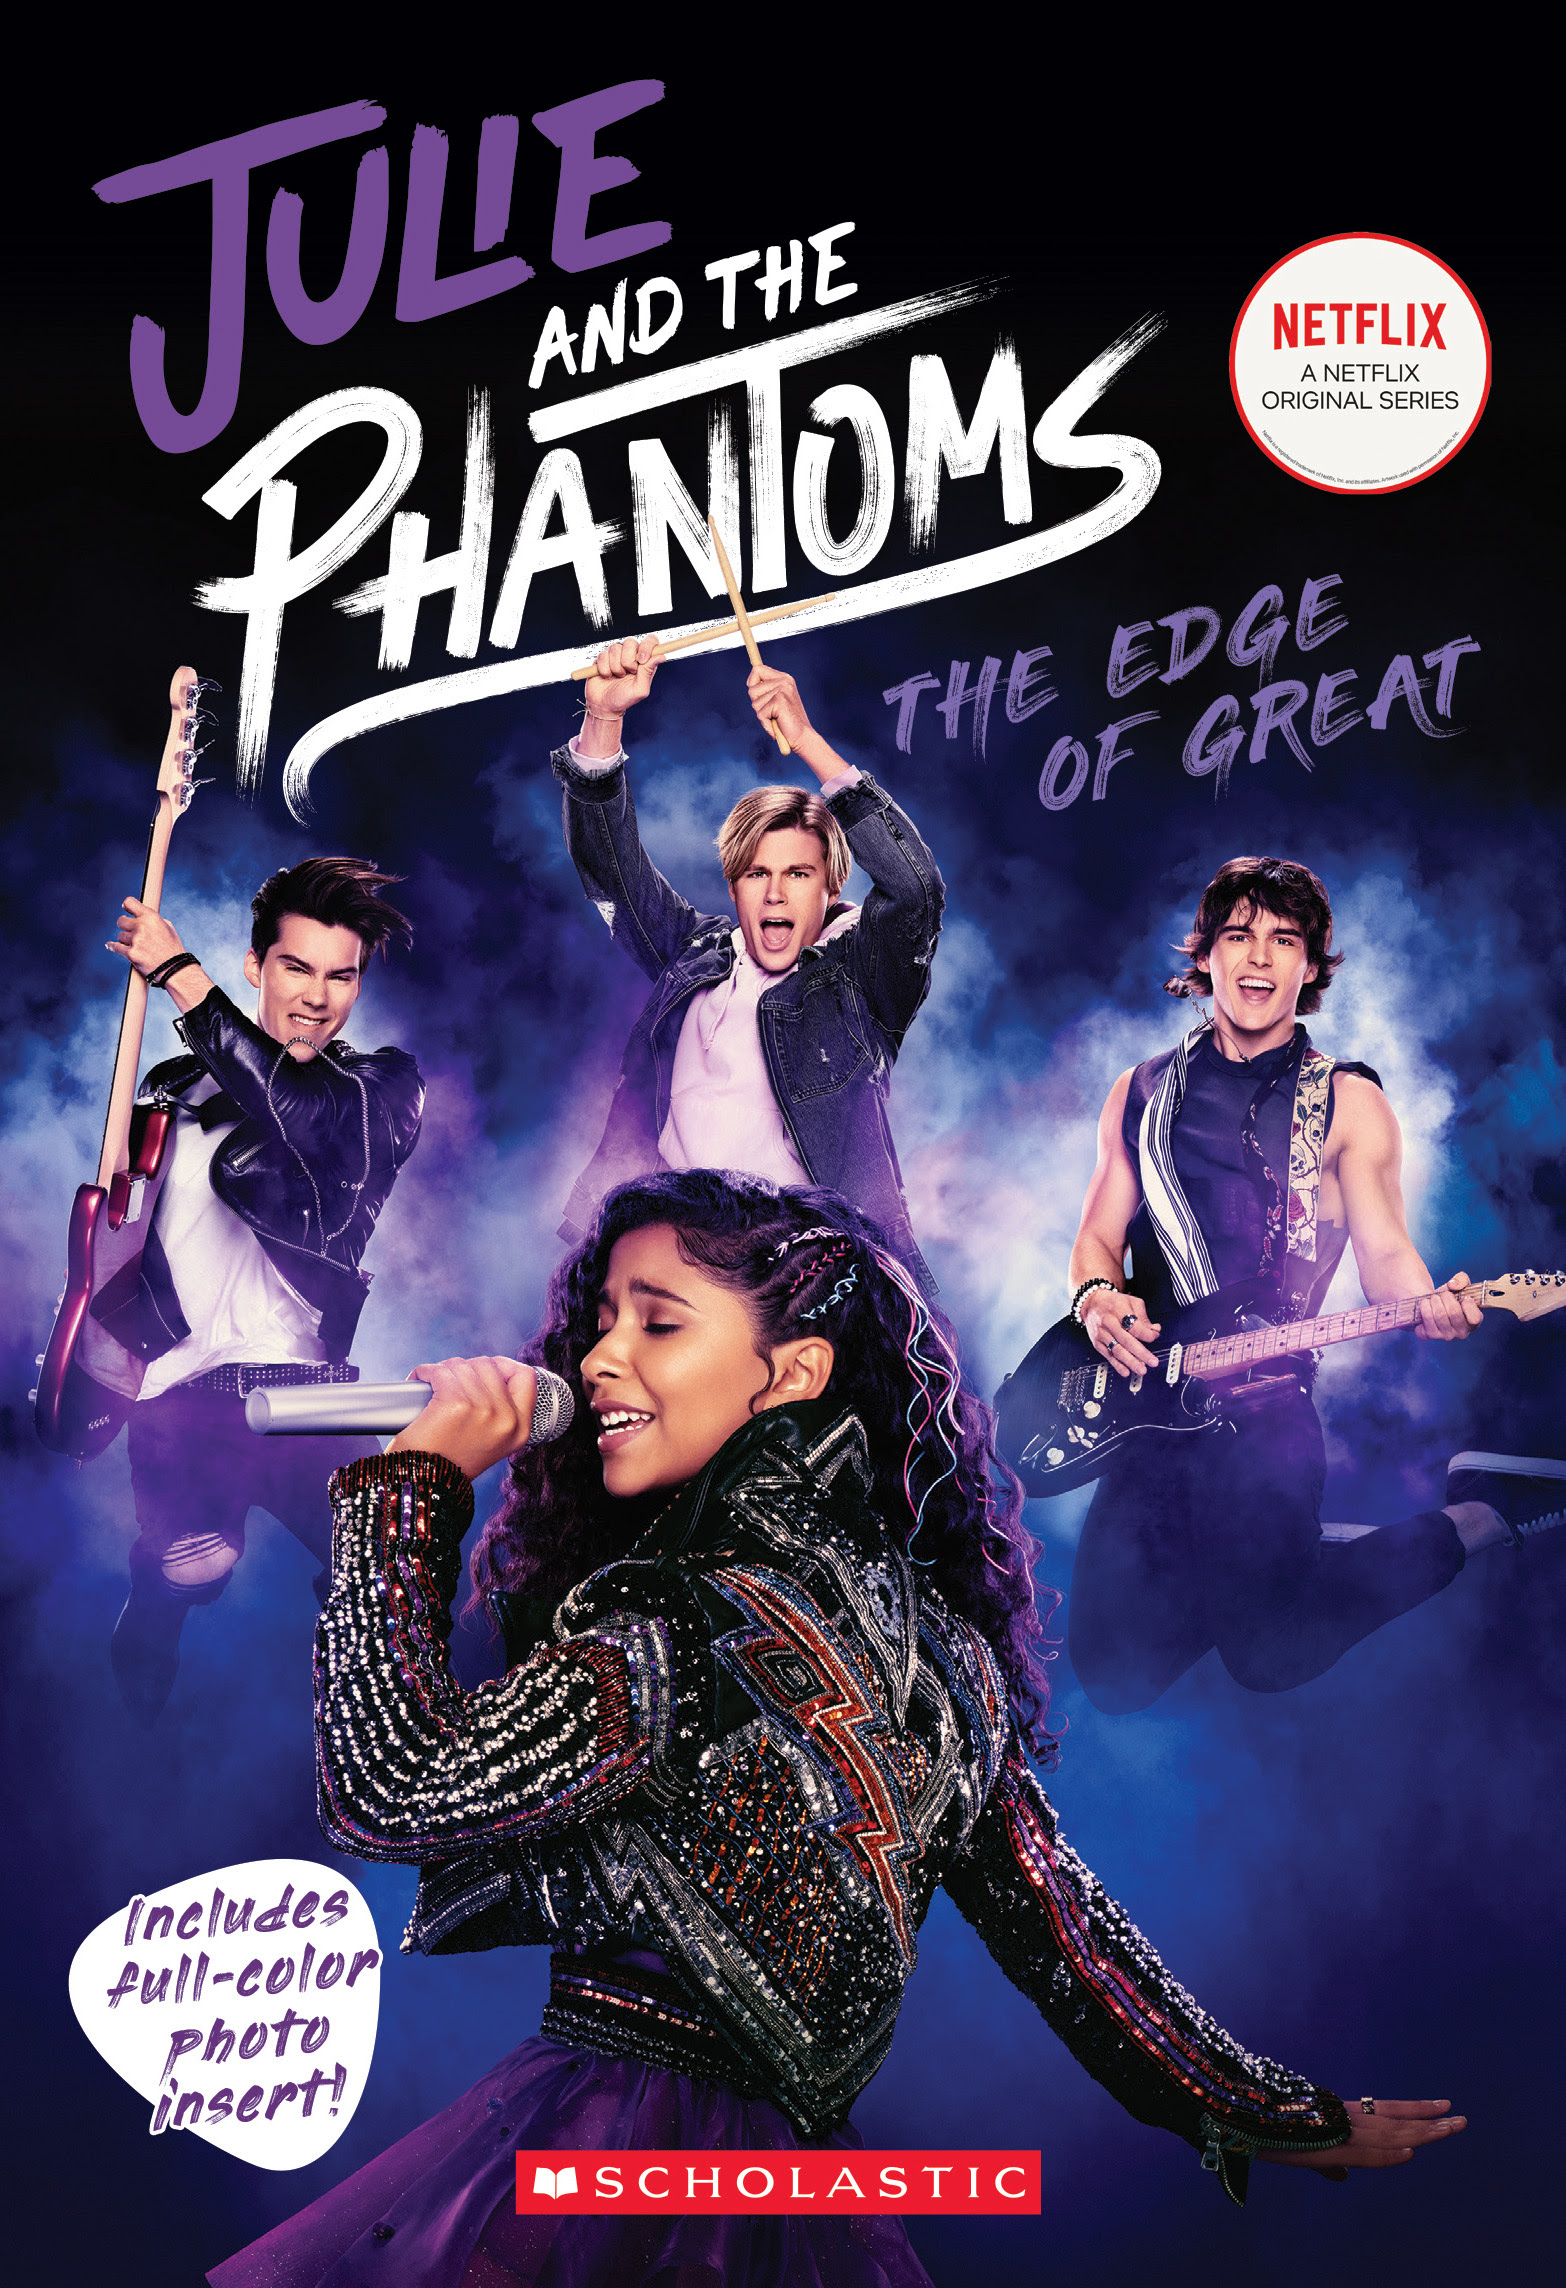 pdf download Julie and the Phantoms: The Edge of Great